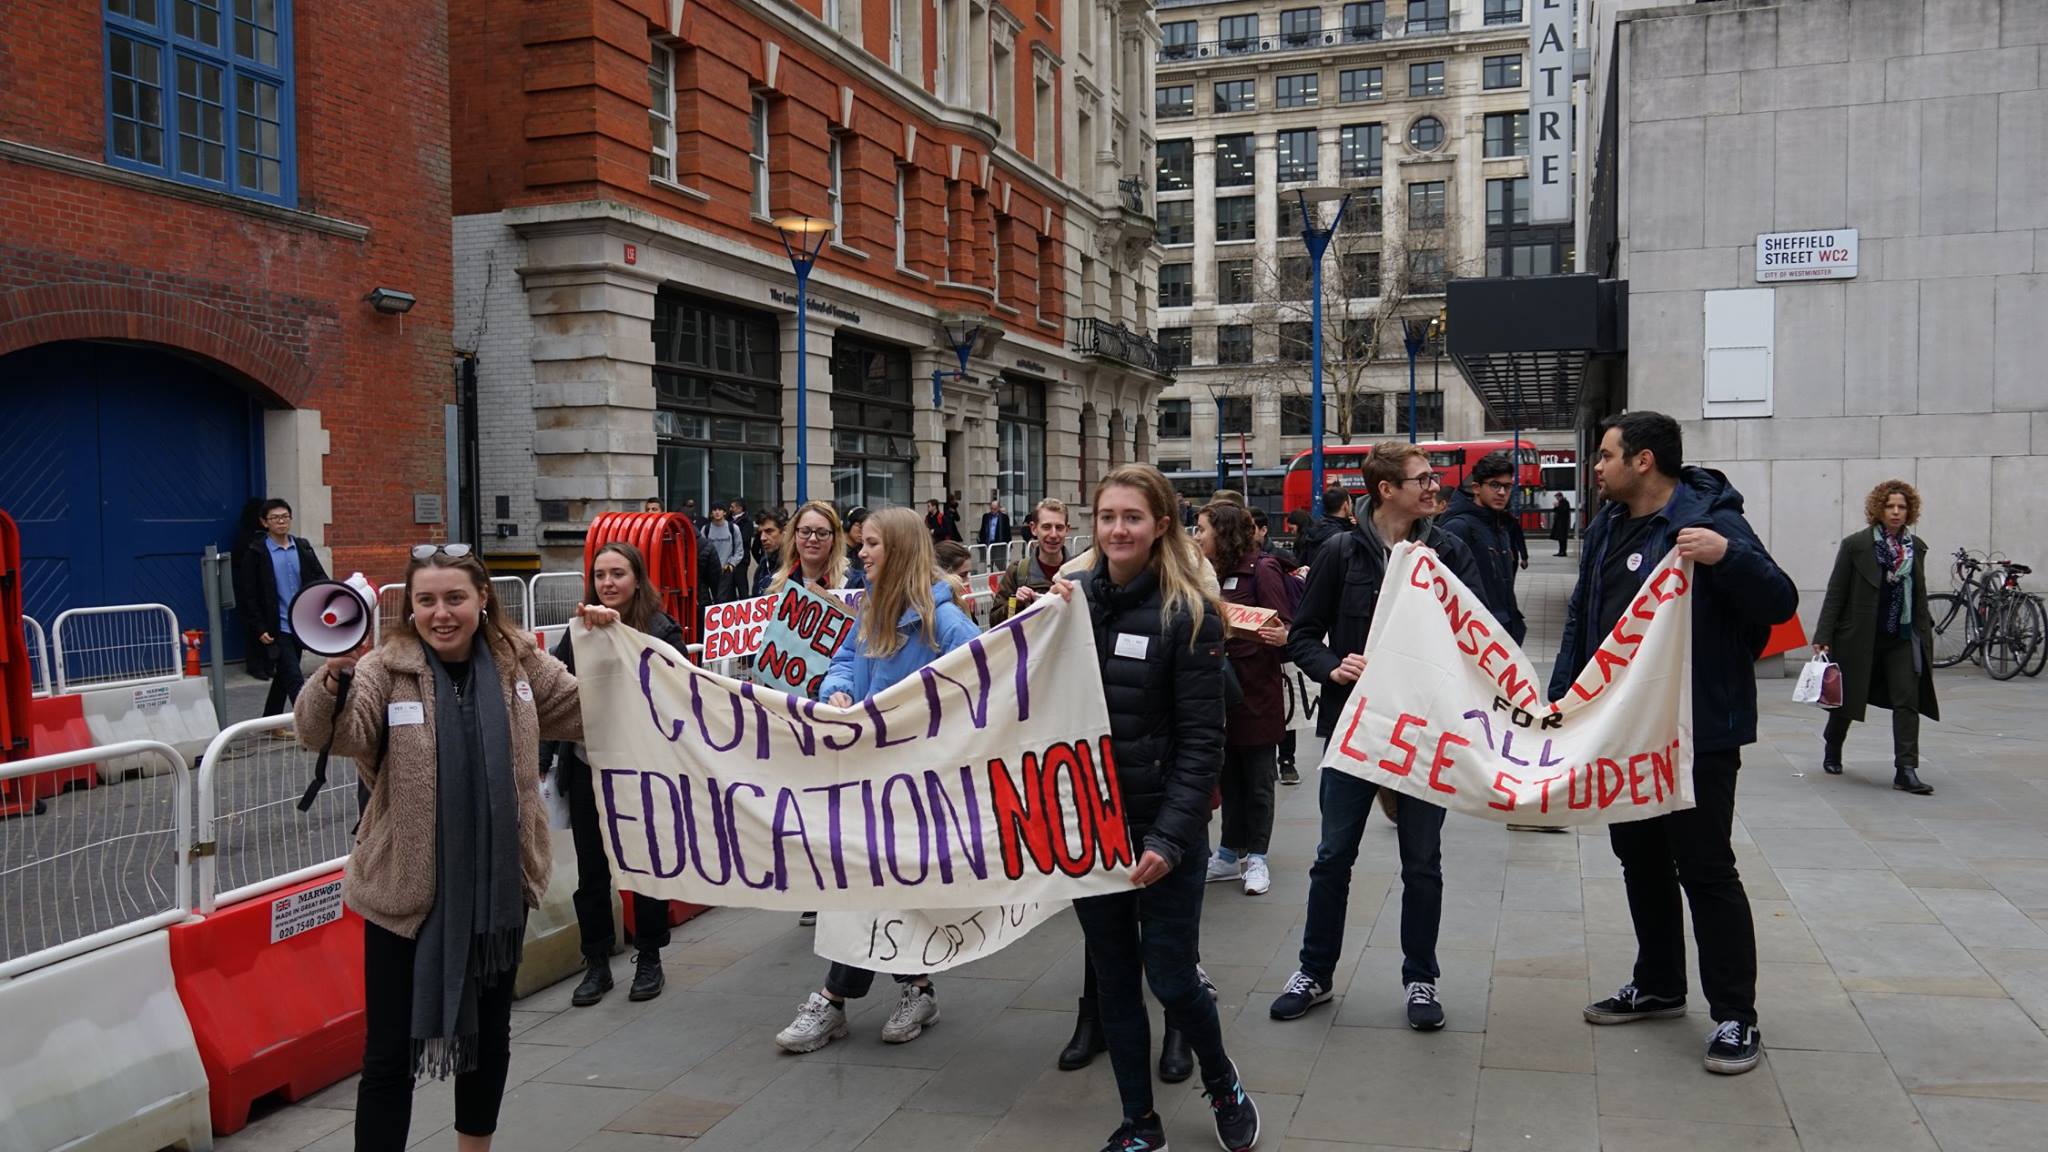 Students attending a consent education demonstration